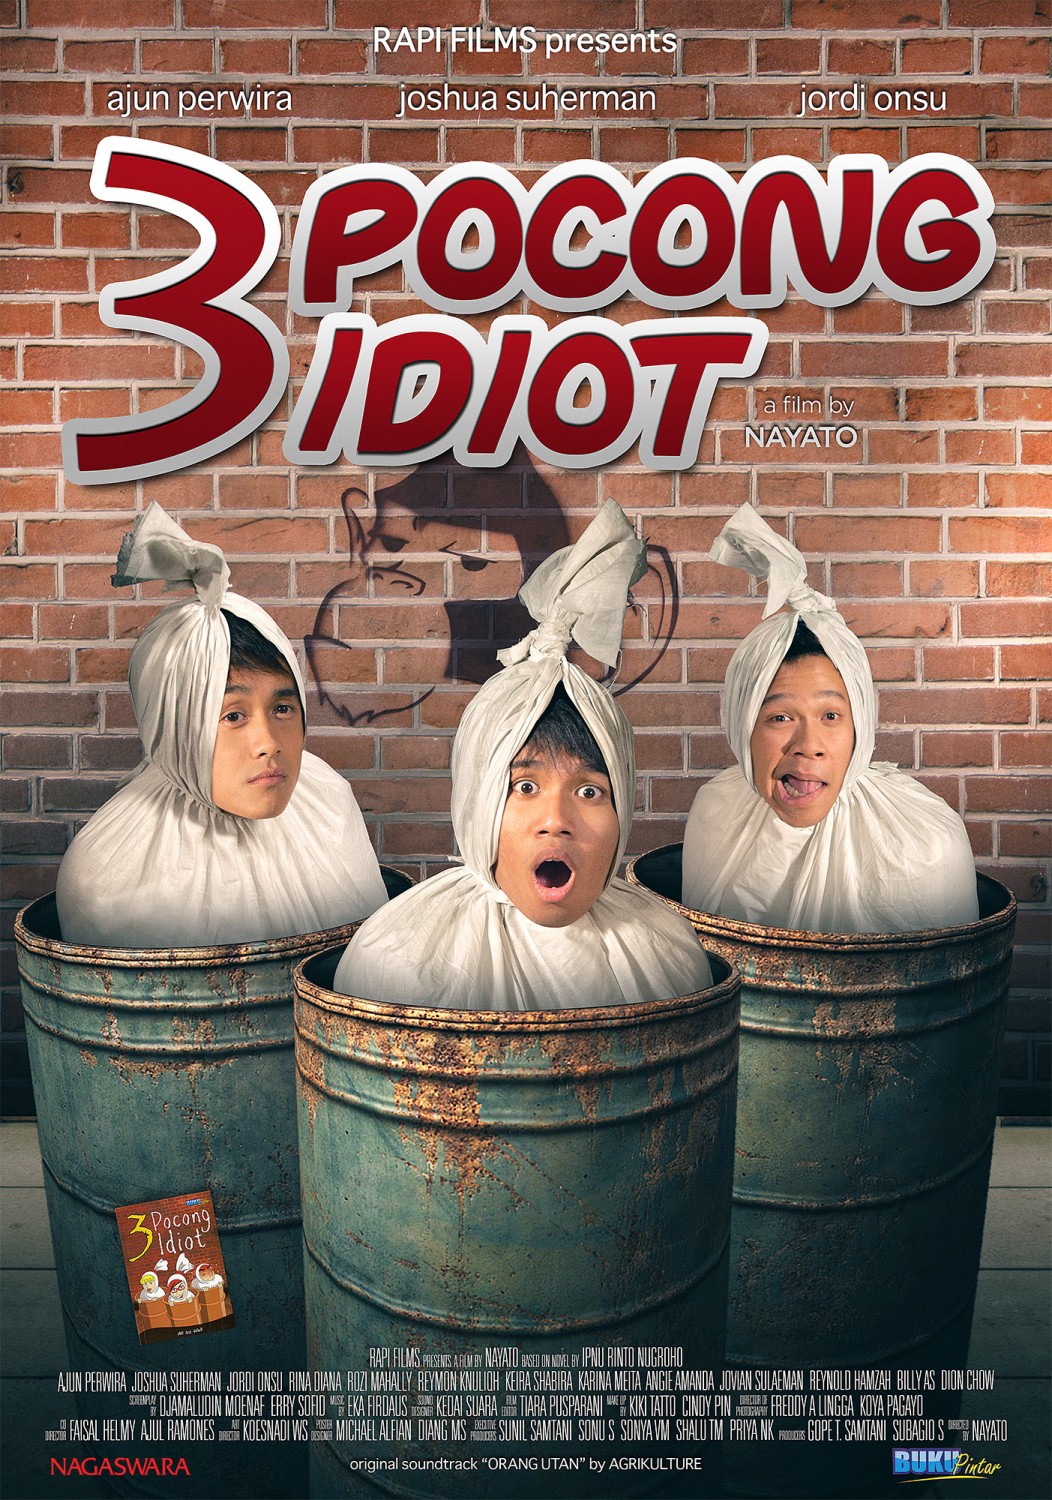 Extra Large Movie Poster Image for 3 pocong idiot (#2 of 2)